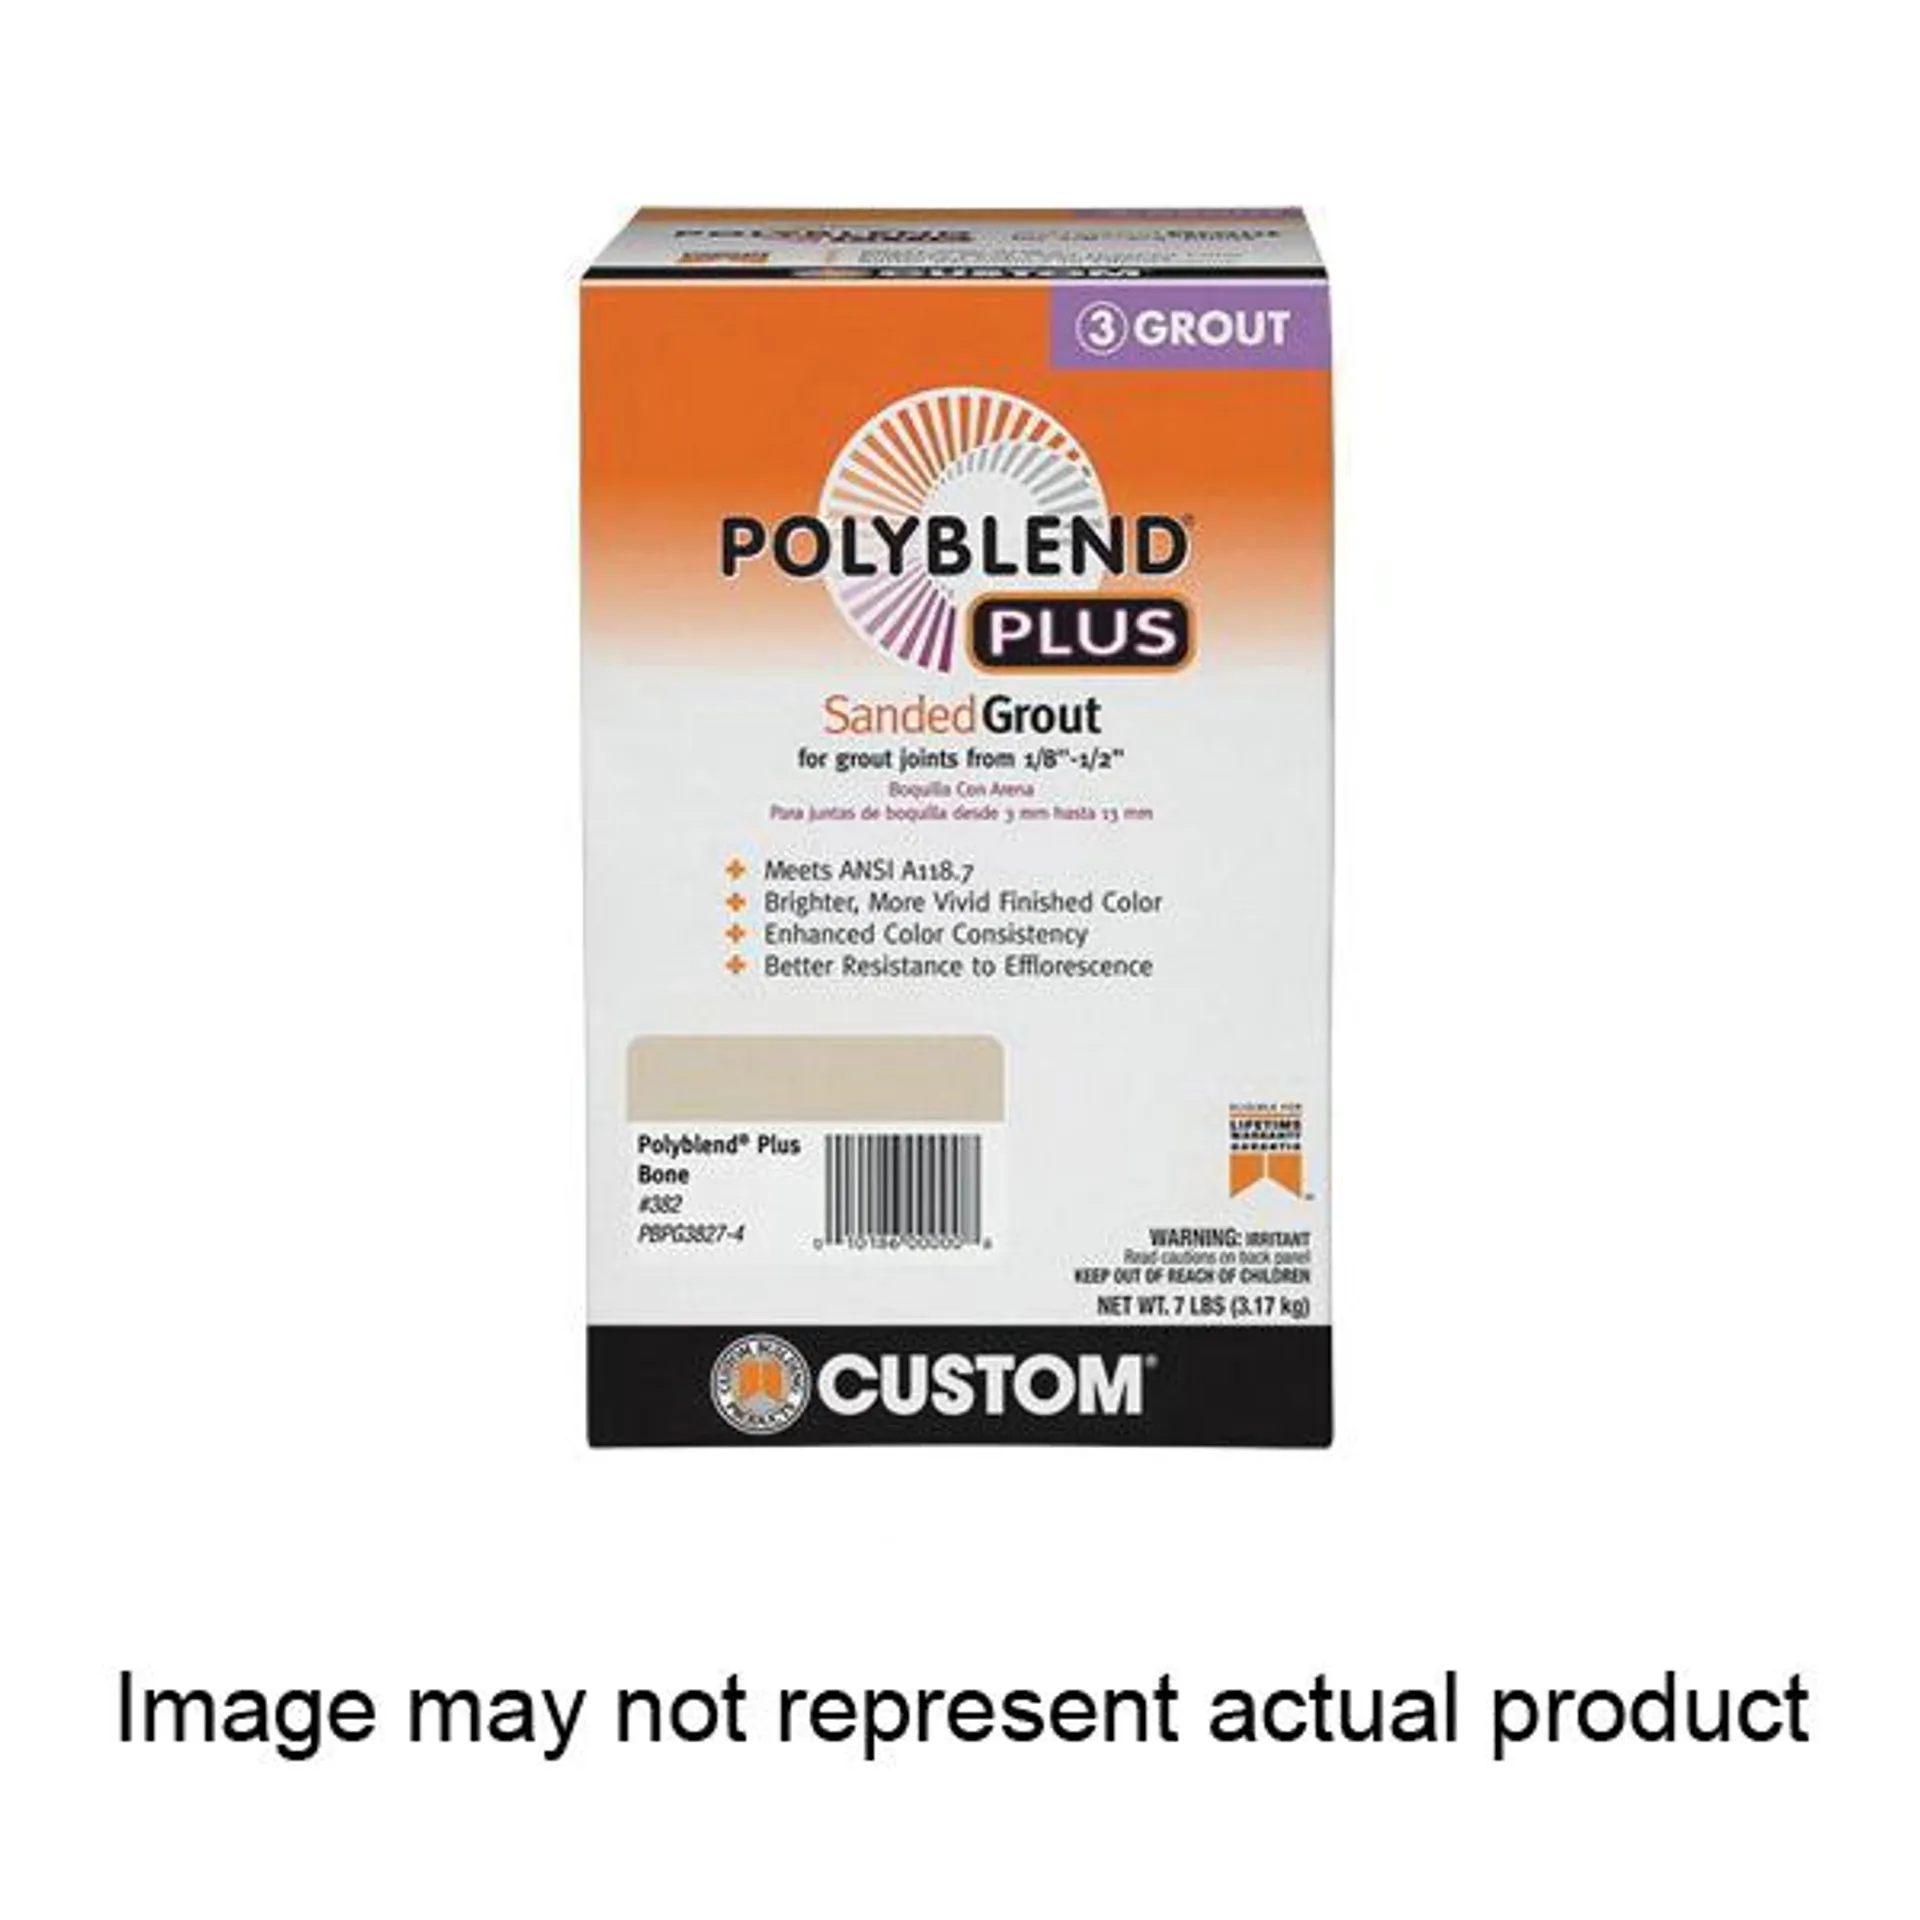 Polyblend Plus PBPG6407-4 Sanded Grout, Solid Powder, Characteristic, Arctic White, 7 lb Box